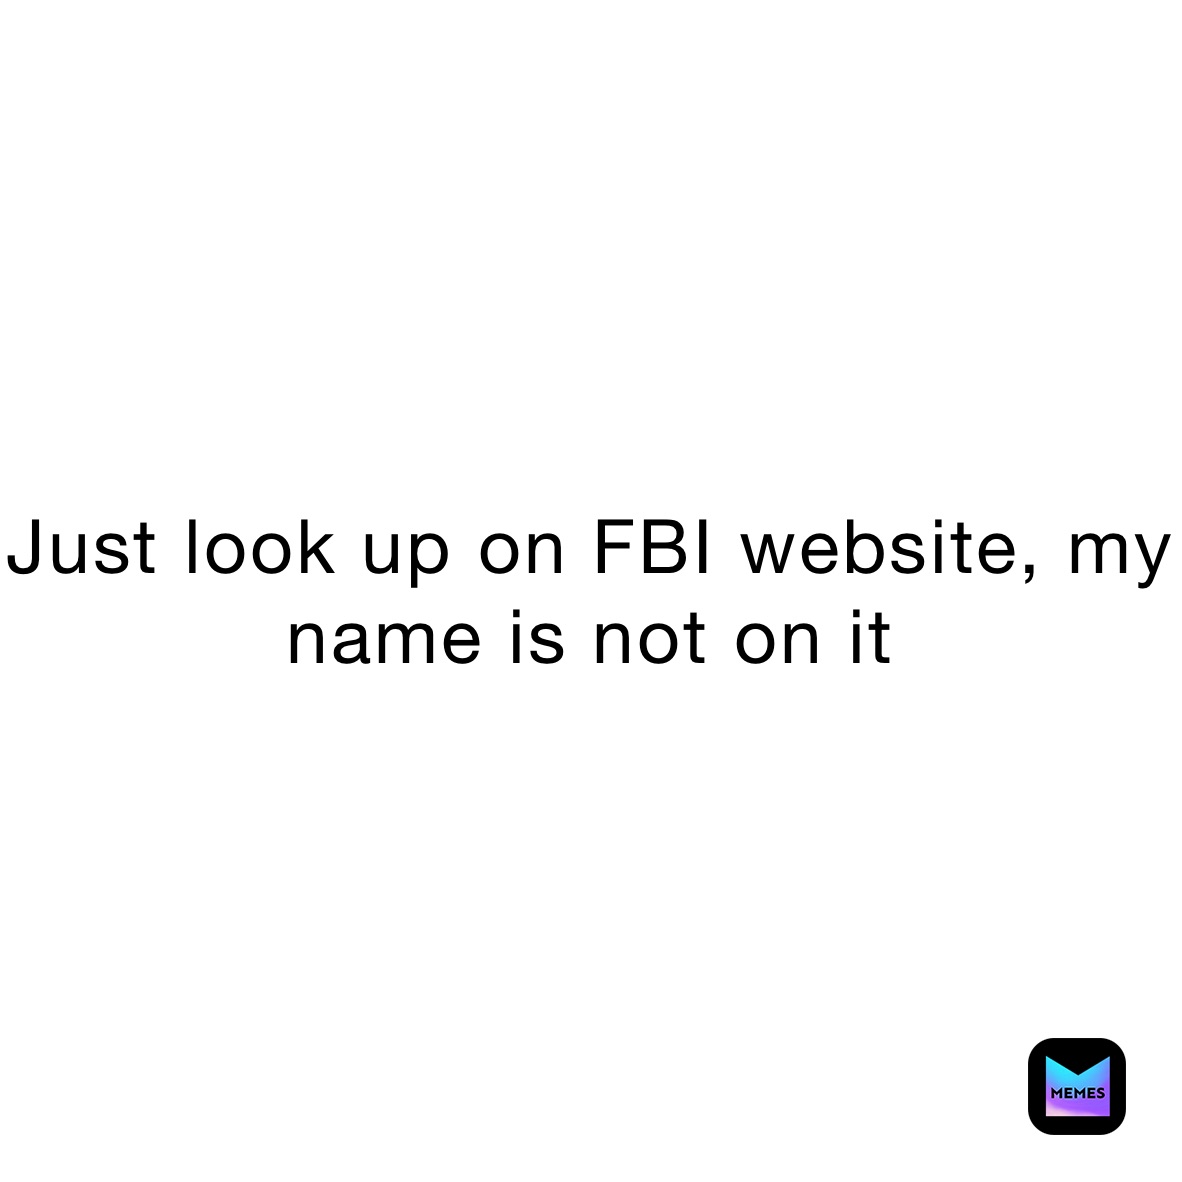 Just look up on FBI website, my name is not on it  